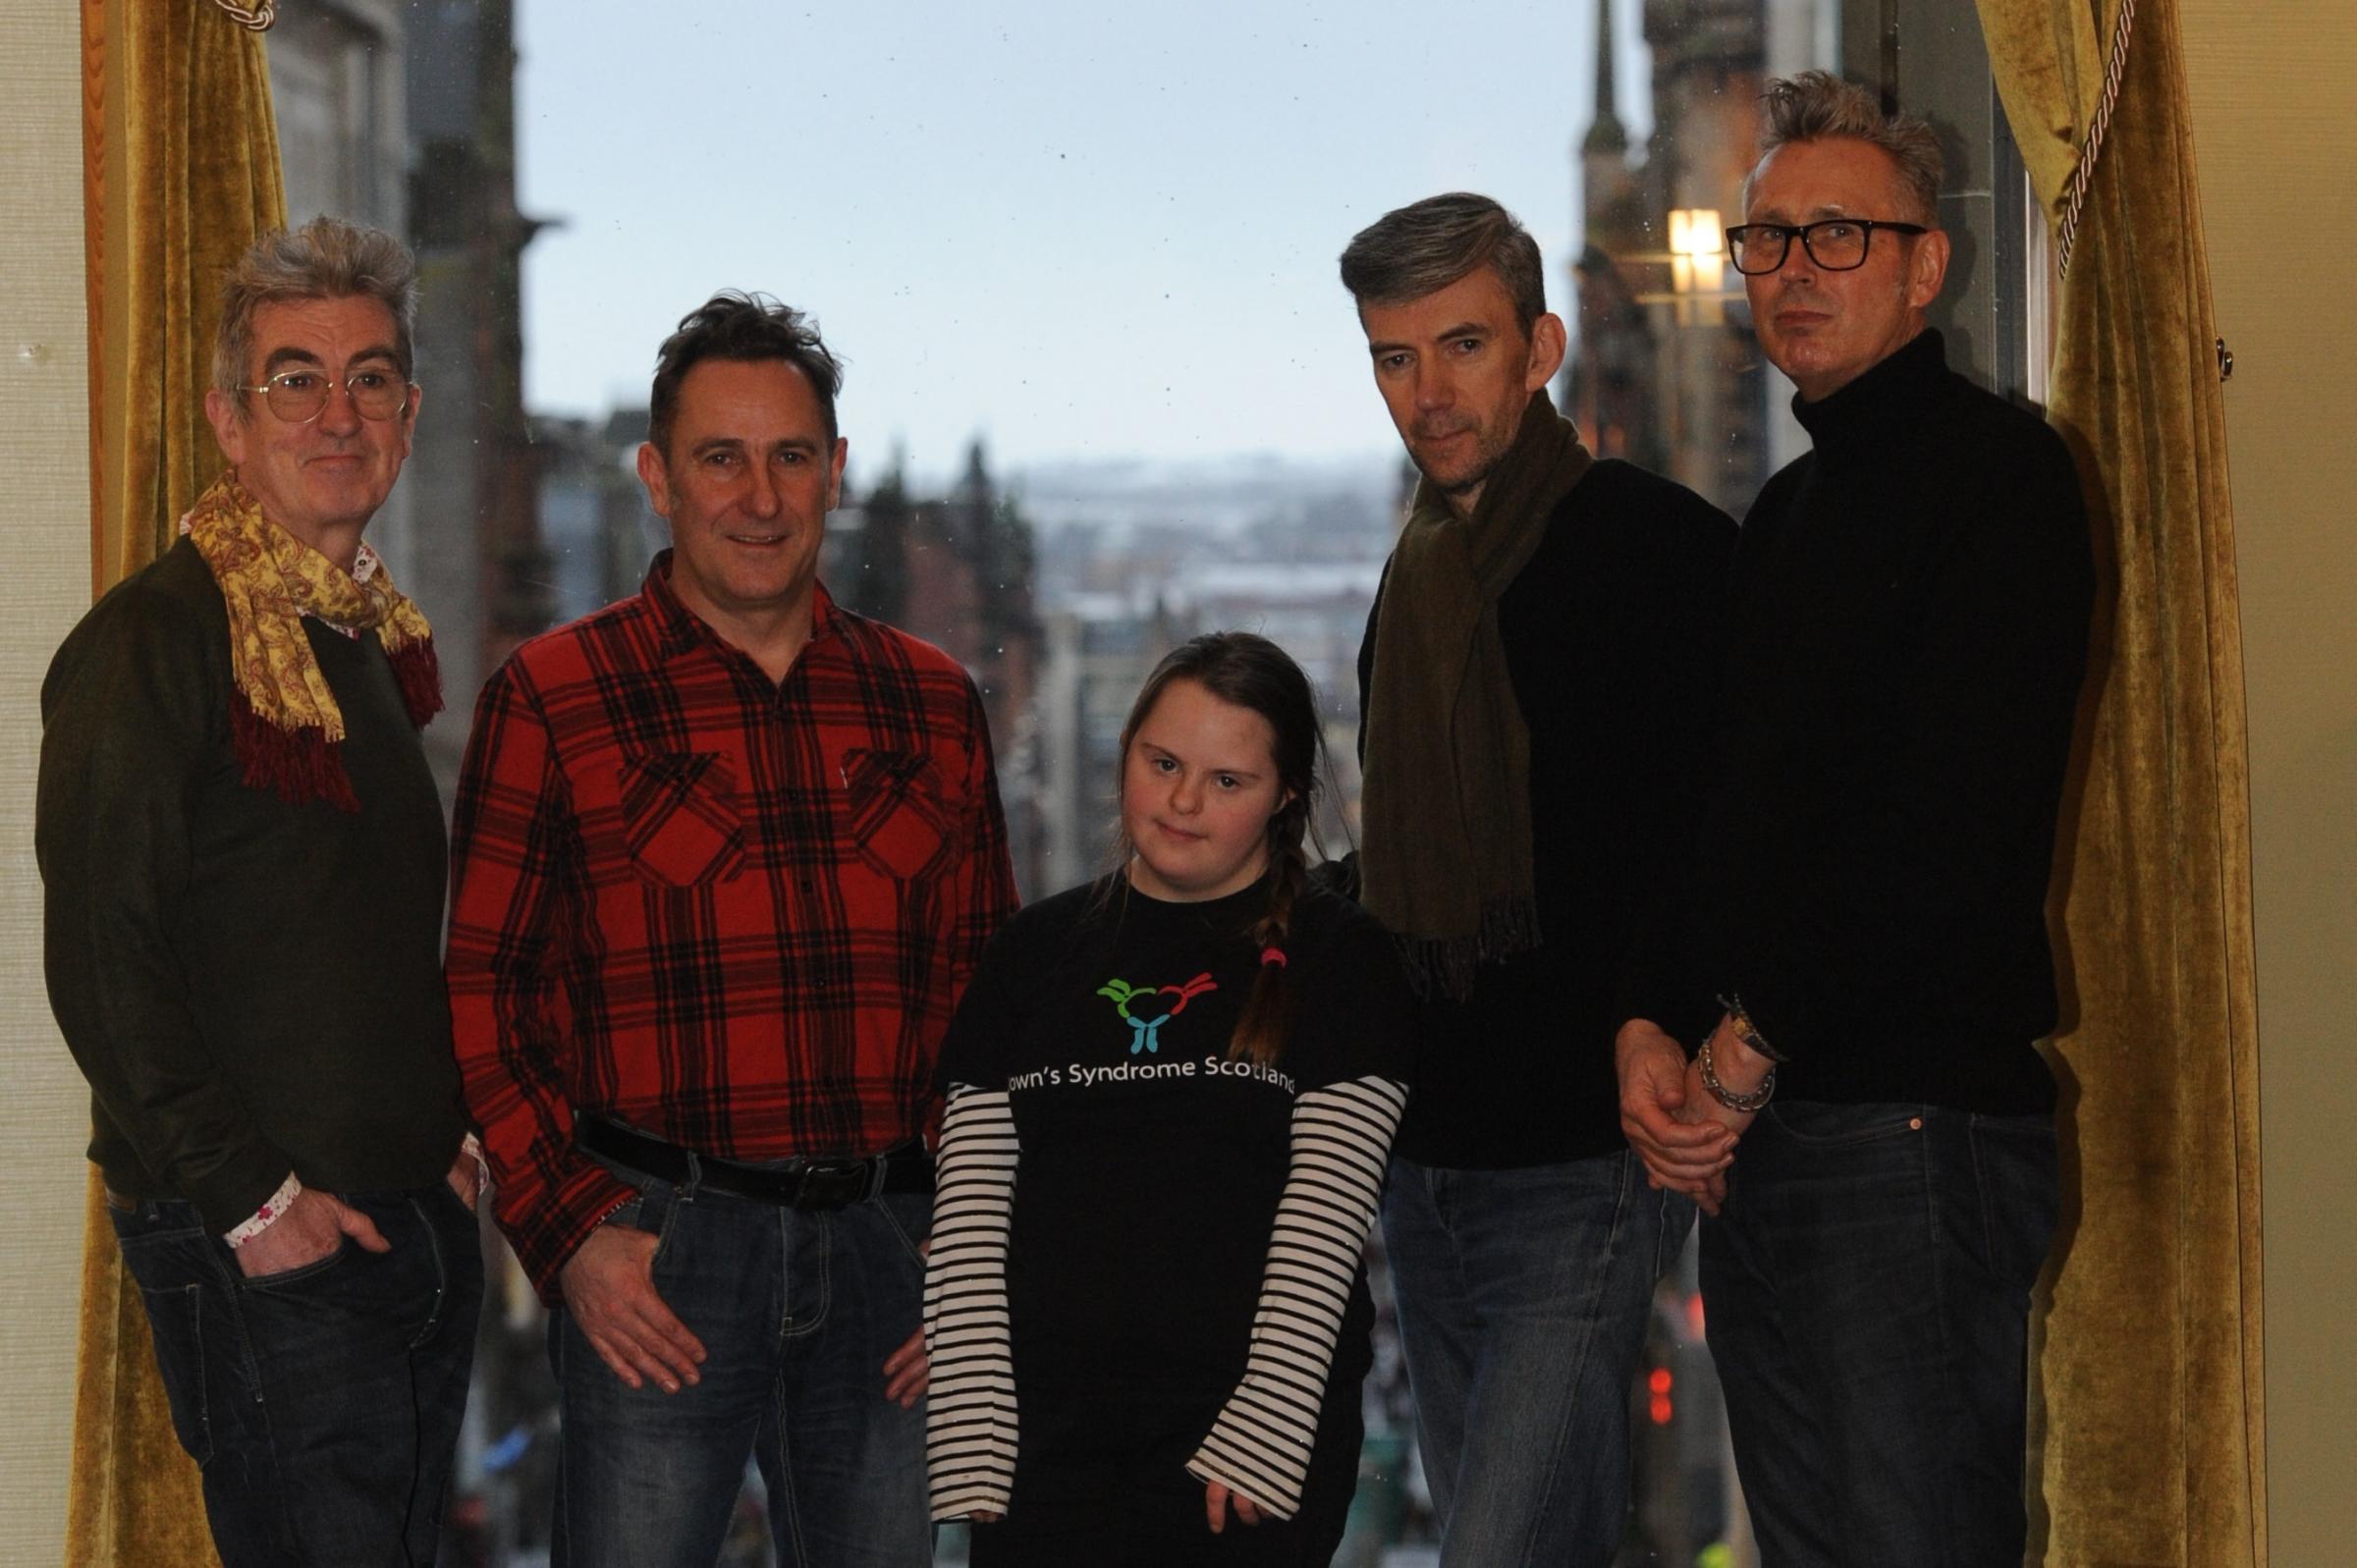 Matilda with her dad Douglas MacIntyre (second left), and other stars of Sandfest 2018 (left to right) Ken McCluskey, James Grant and Grahame Skinner. Pic: Kirsty Anderson